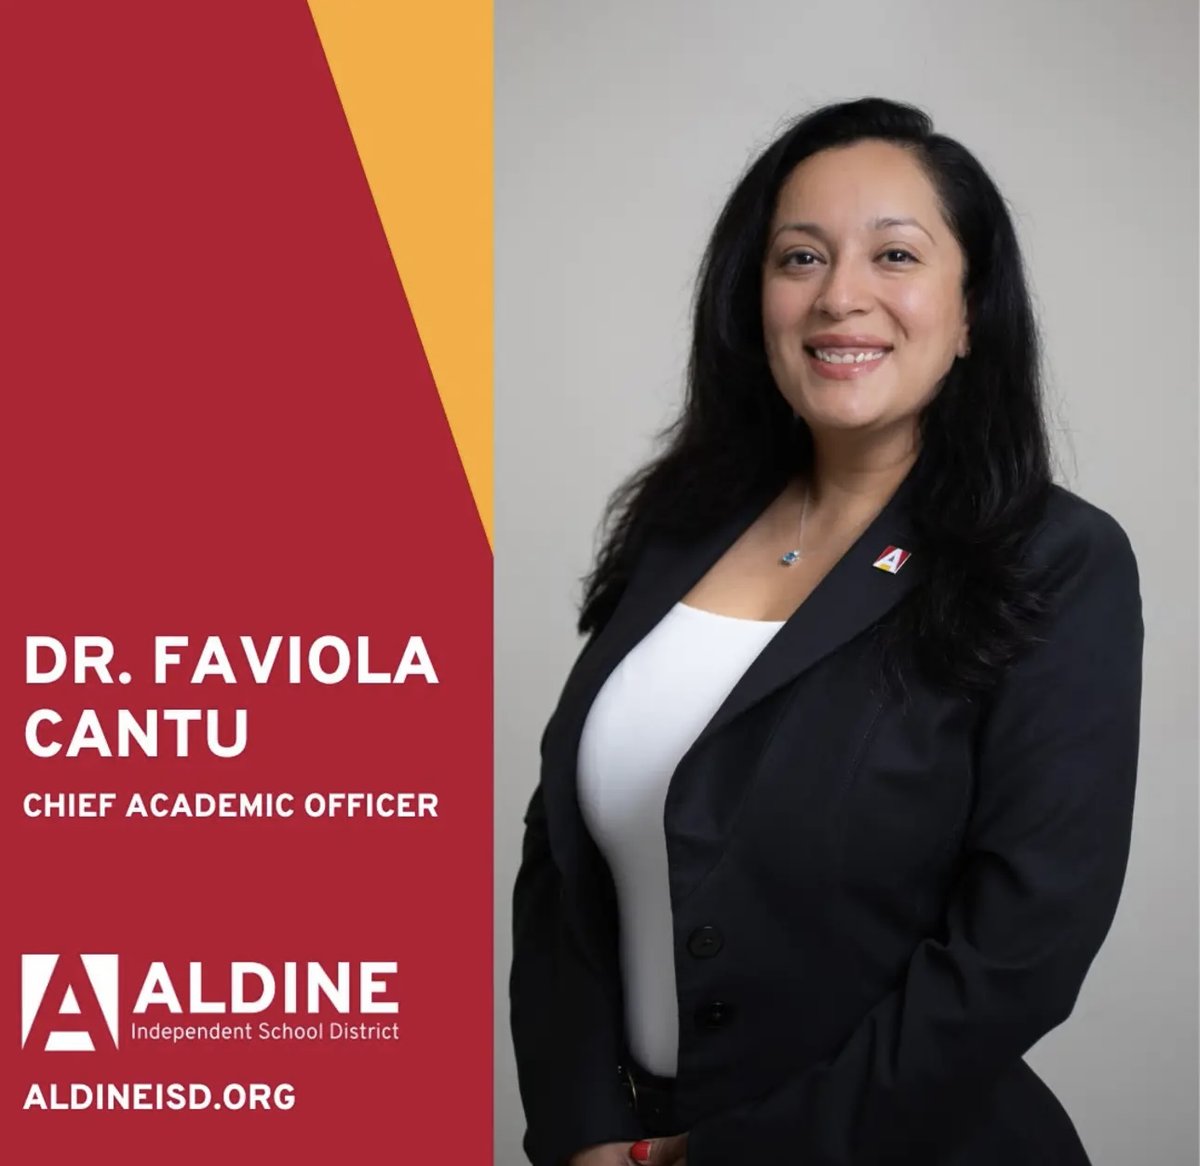 ¡Felicidades! We would like to congratulate our #ALLA President & President-Elect on their new roles in our great district of Aldine! We are so proud and look forward to the impact you will make. 🌟 #AldineConnected #AldineConectado #SomosAldine #Sisepuede